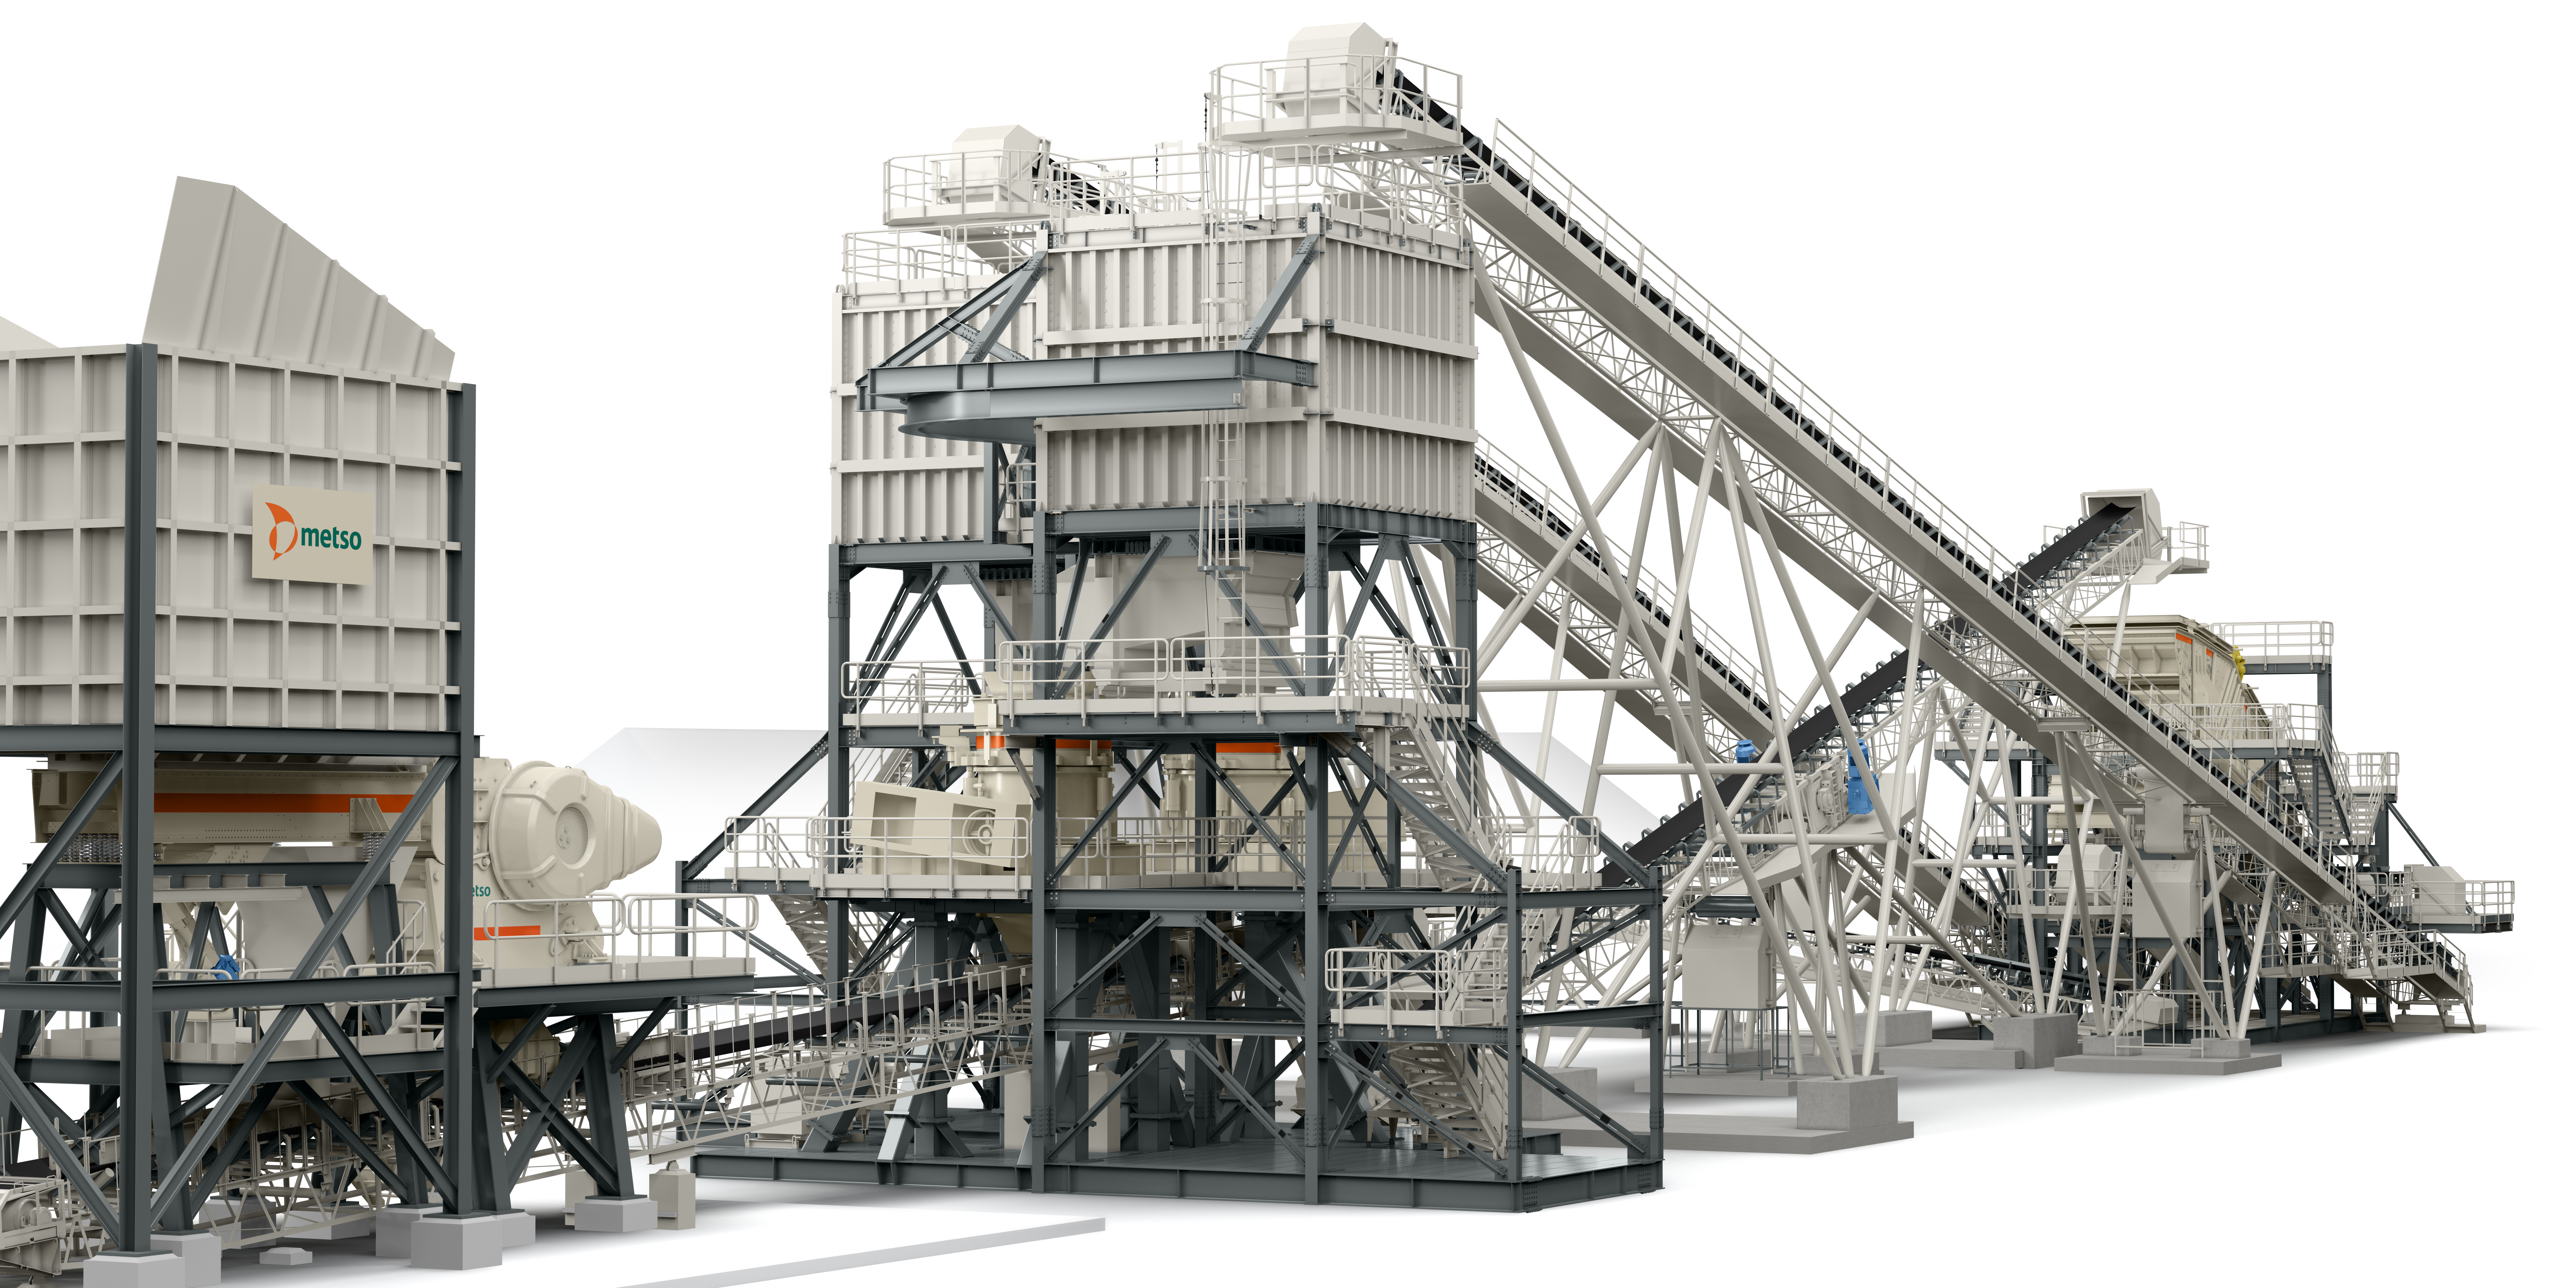 Metso Mining Crushing Stations combine legacy and expertise to bring you 2 productive, cost-efficient and production solutions that are modular.